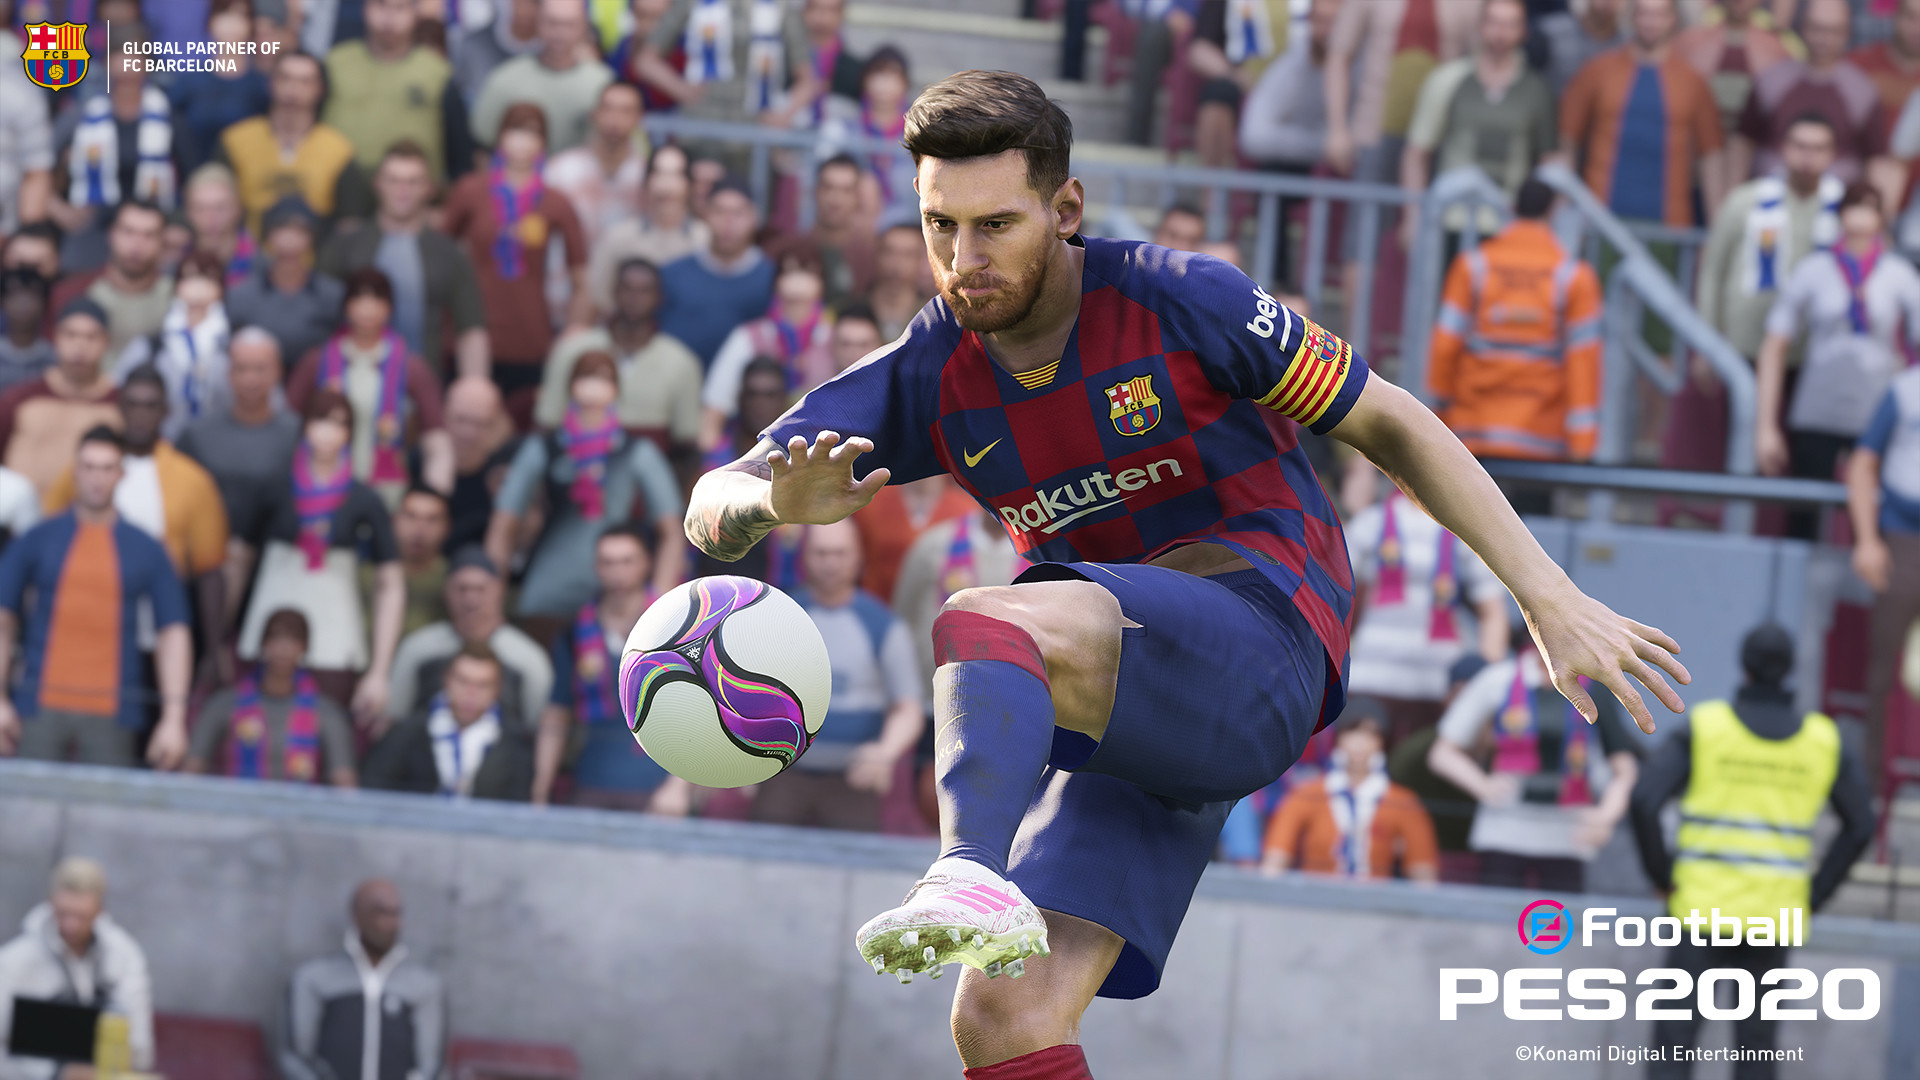 video game, efootball pes 2020, lionel messi, soccer